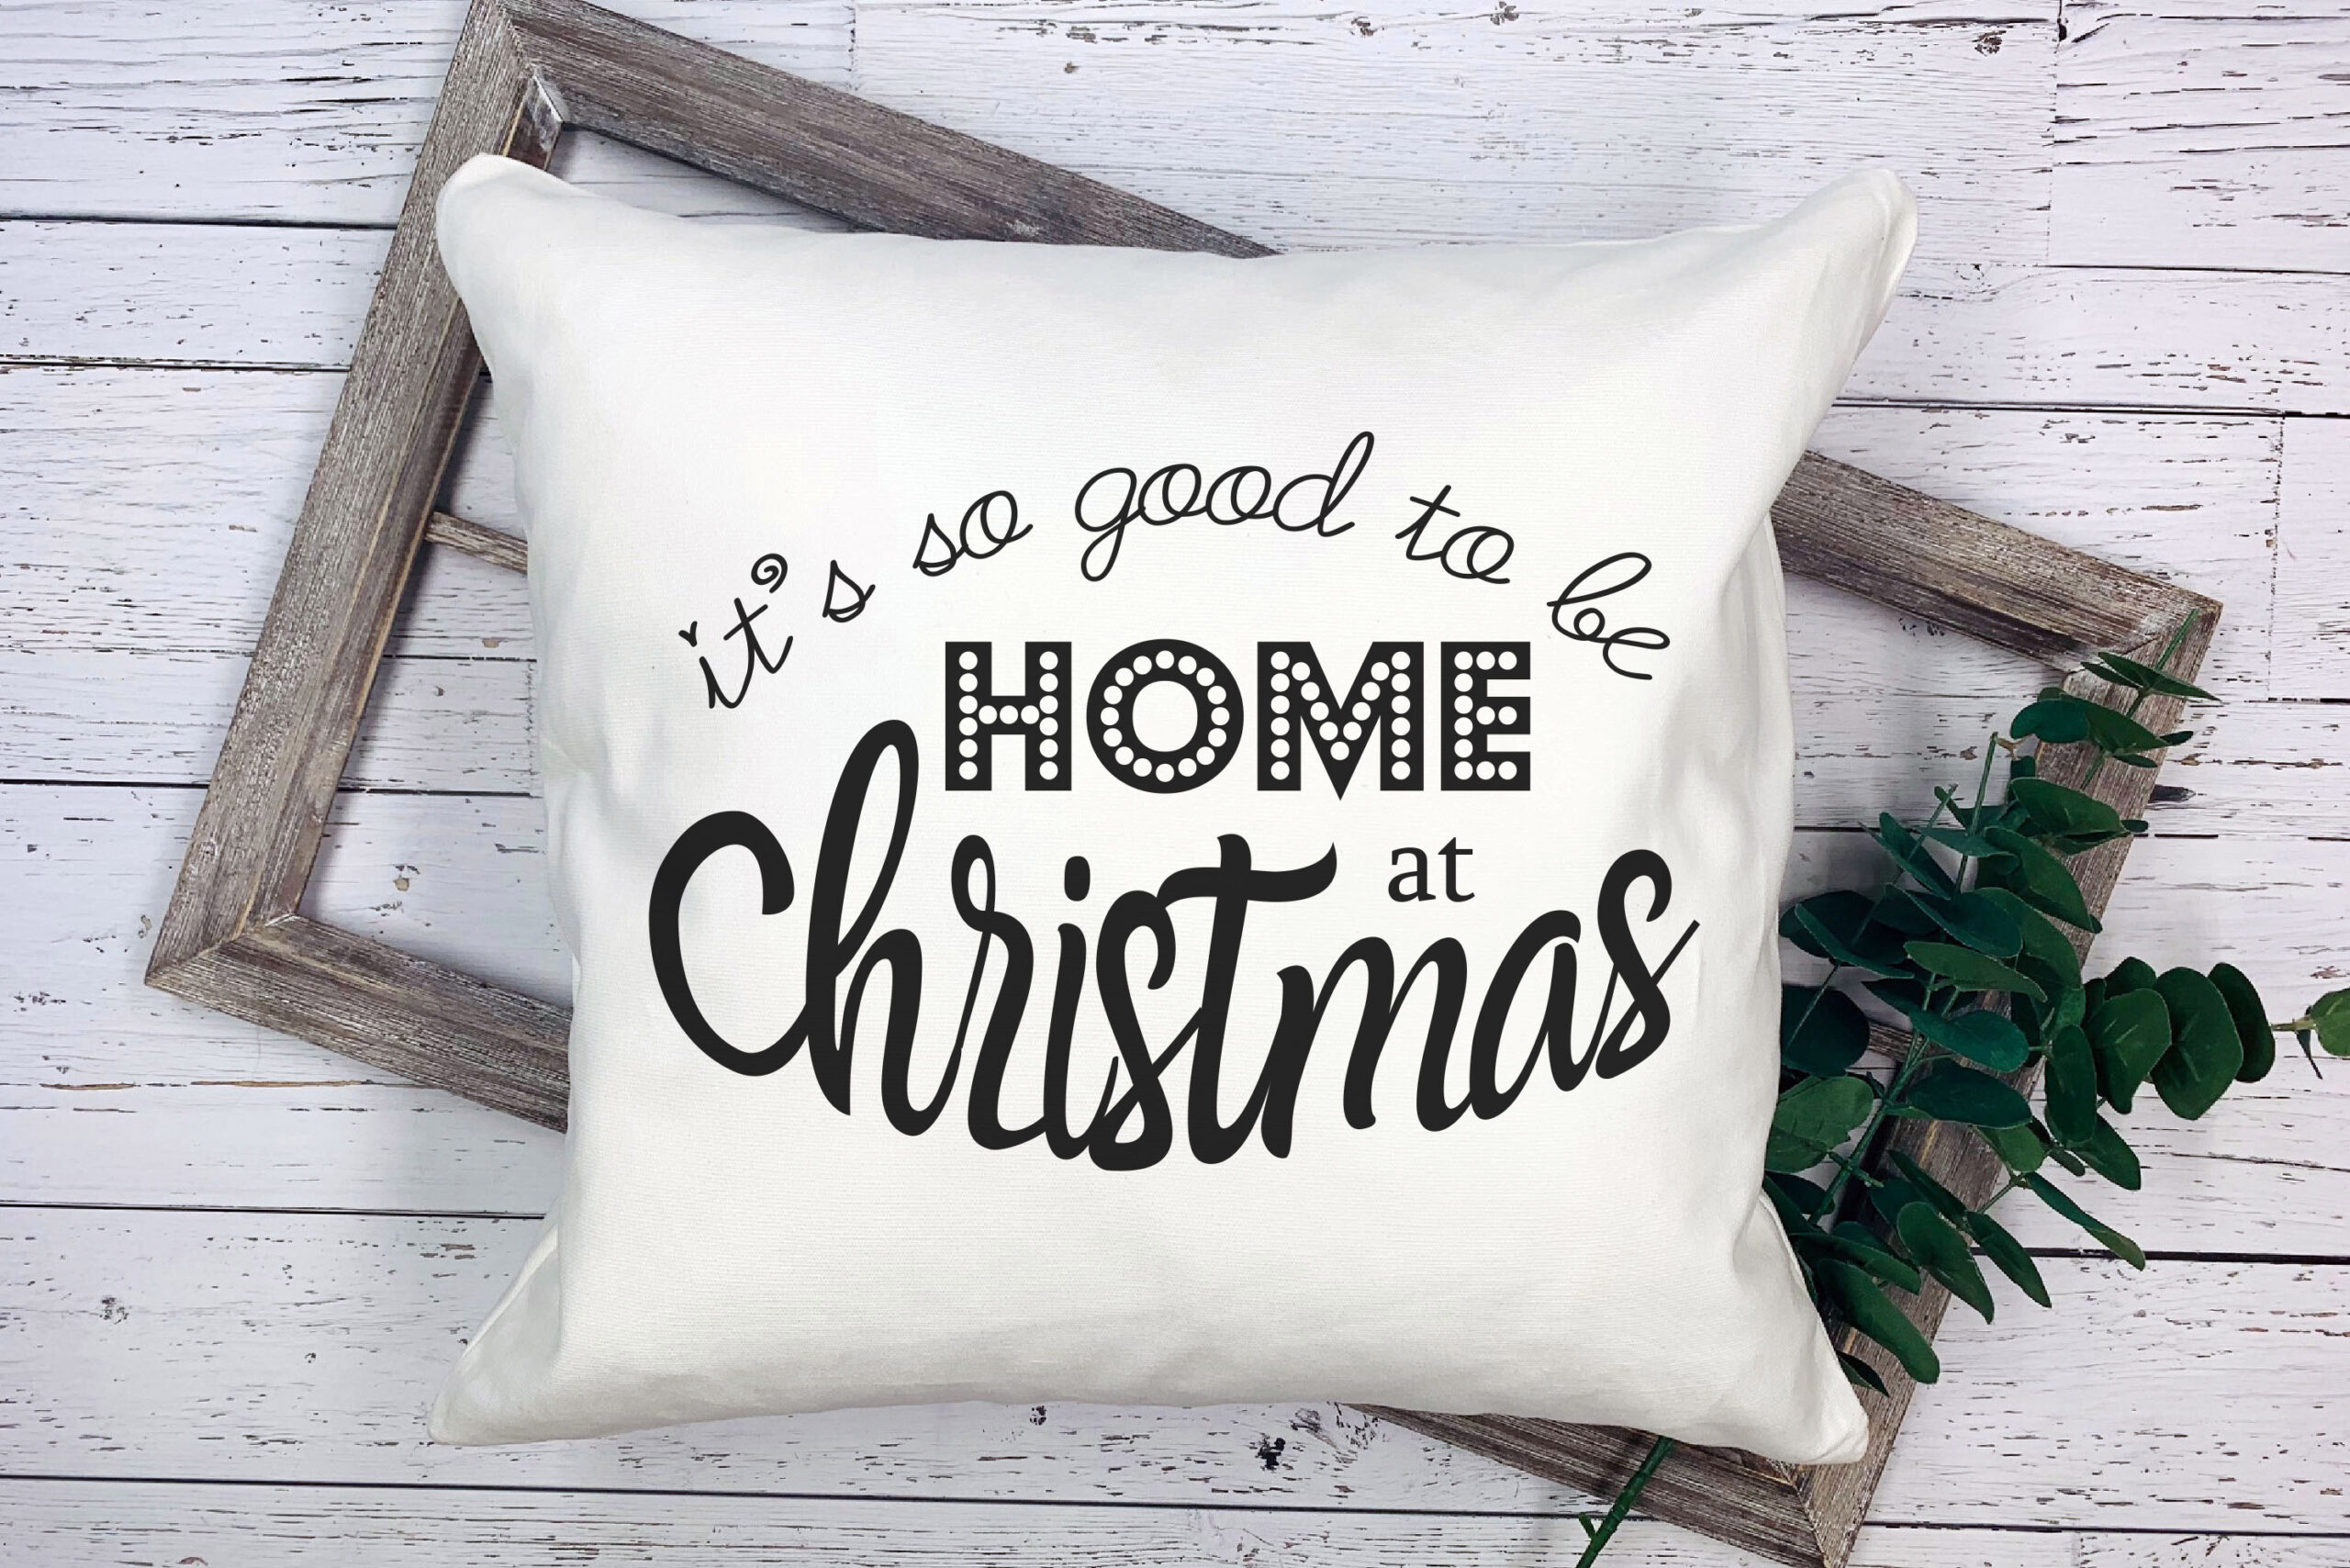 Free Home at Christmas SVG Cutting File for the Cricut.